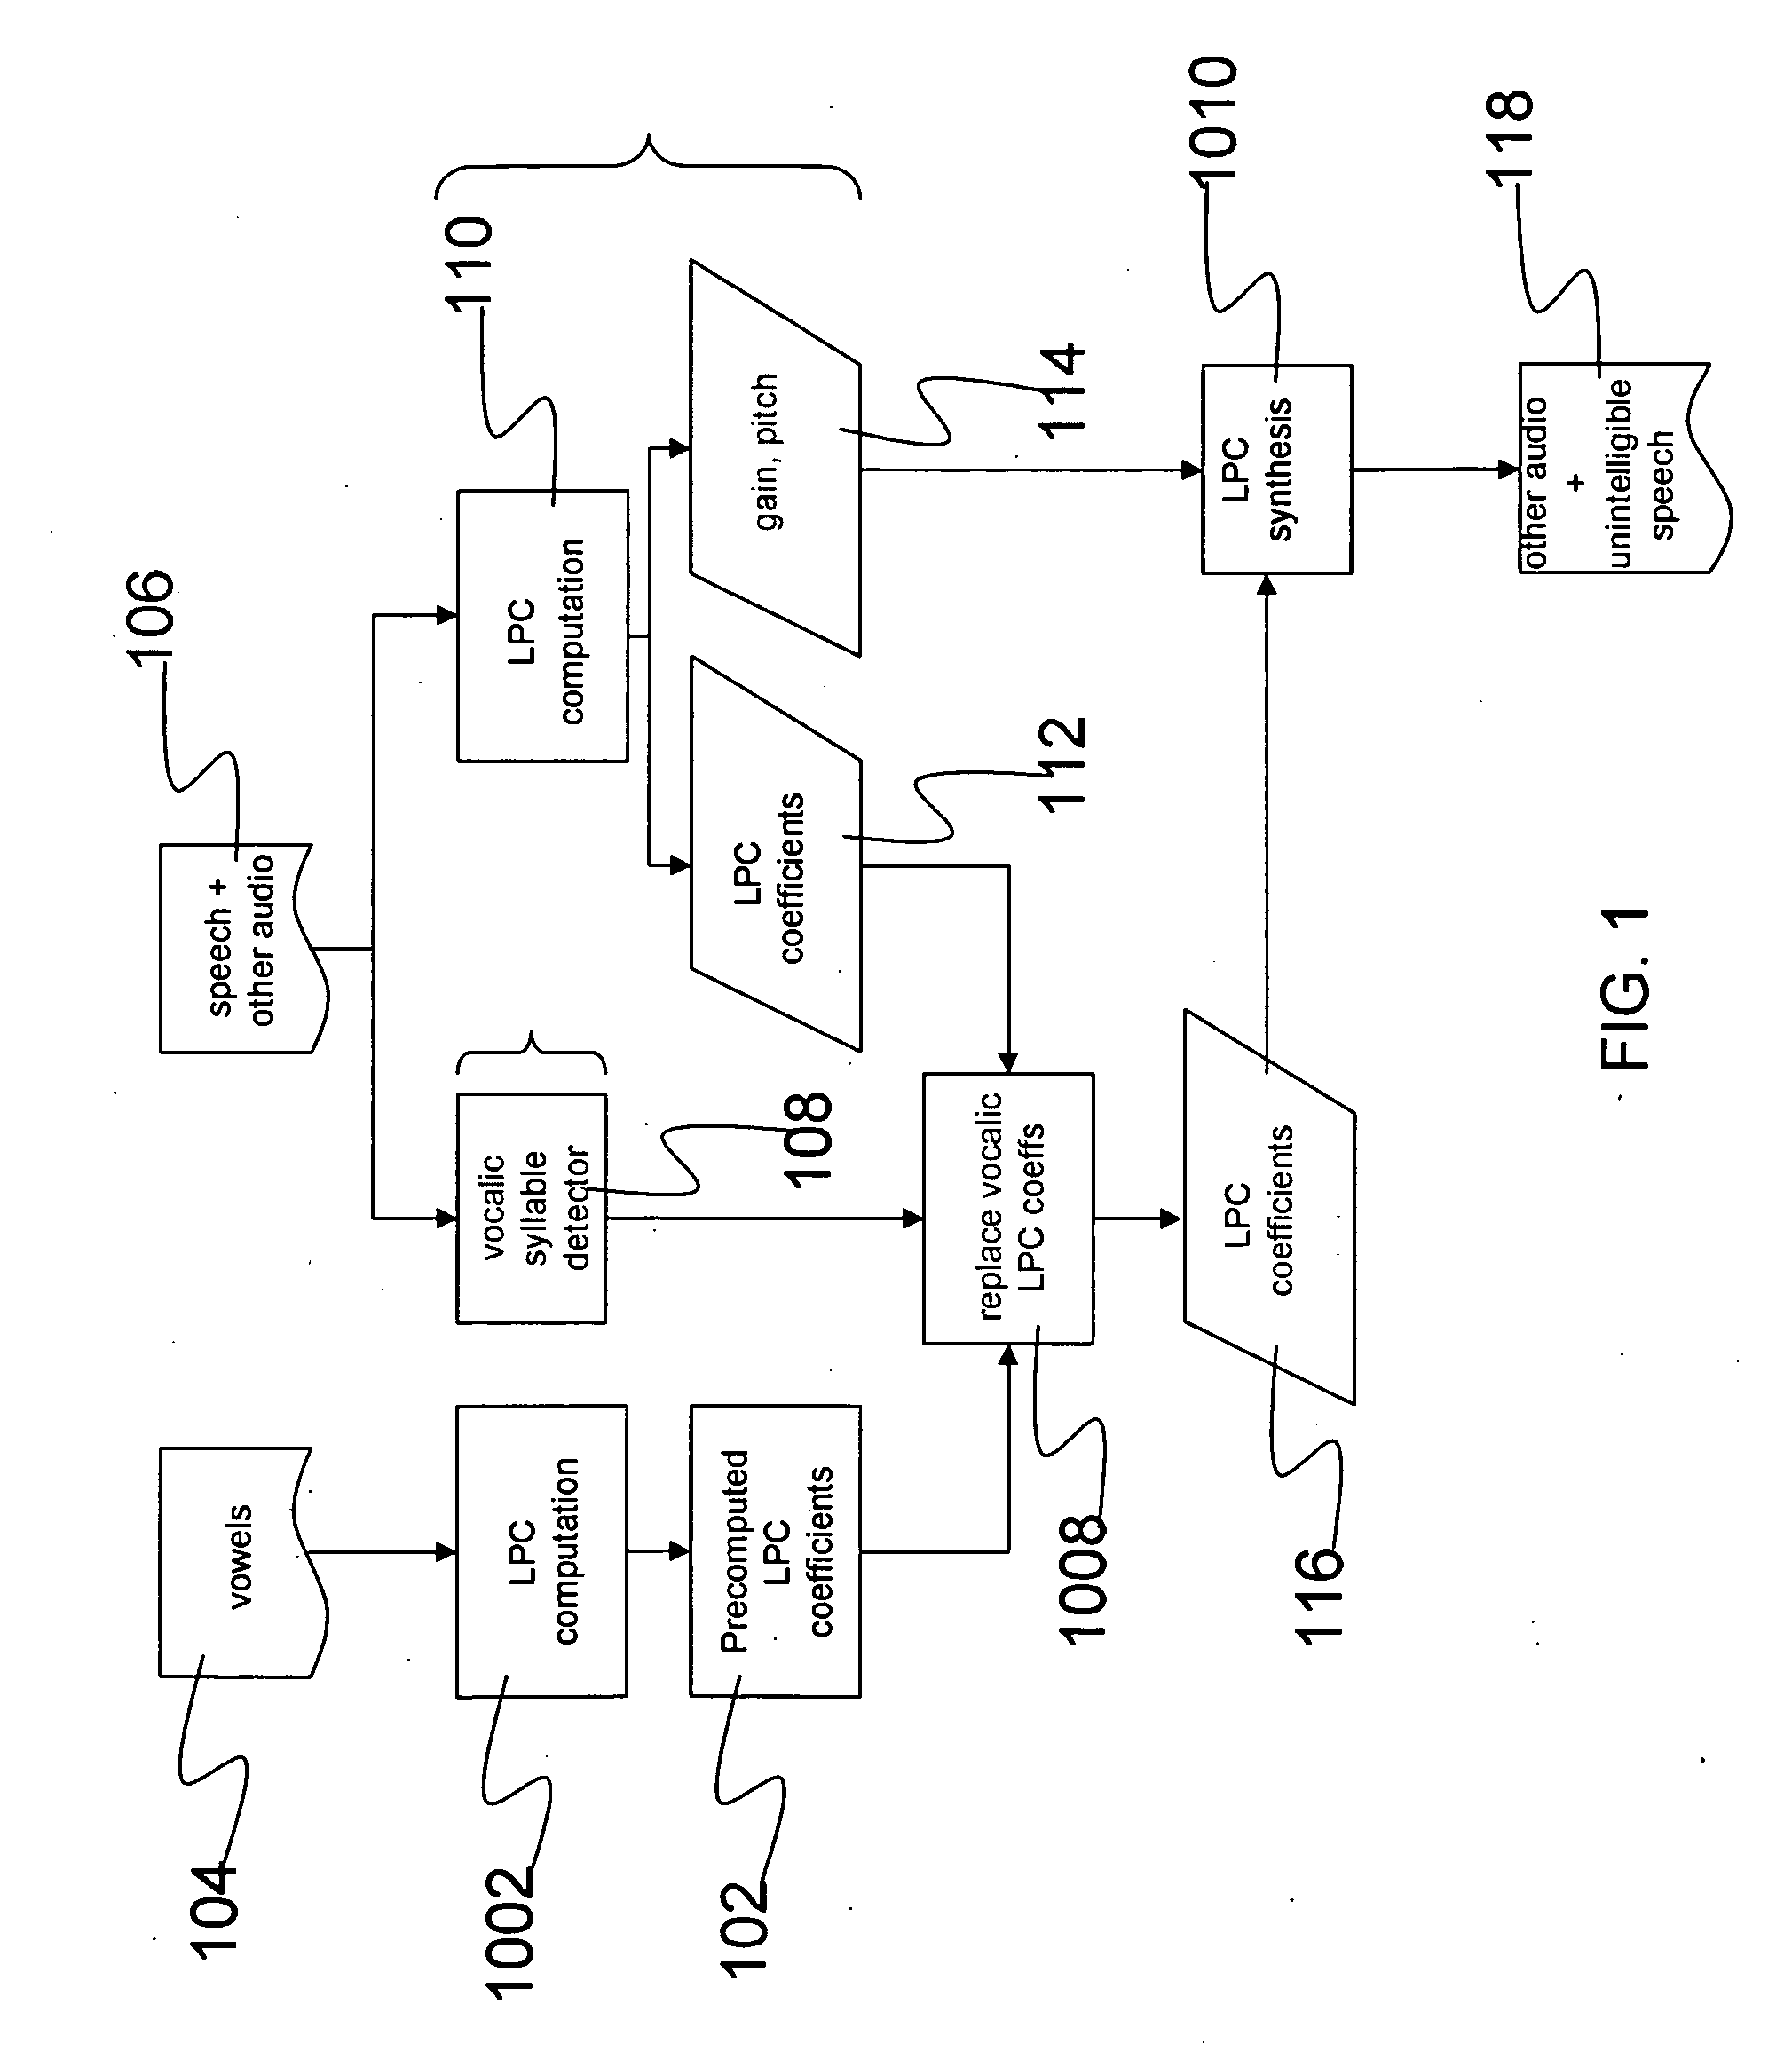 Systems and methods for reducing speech intelligibility while preserving environmental sounds